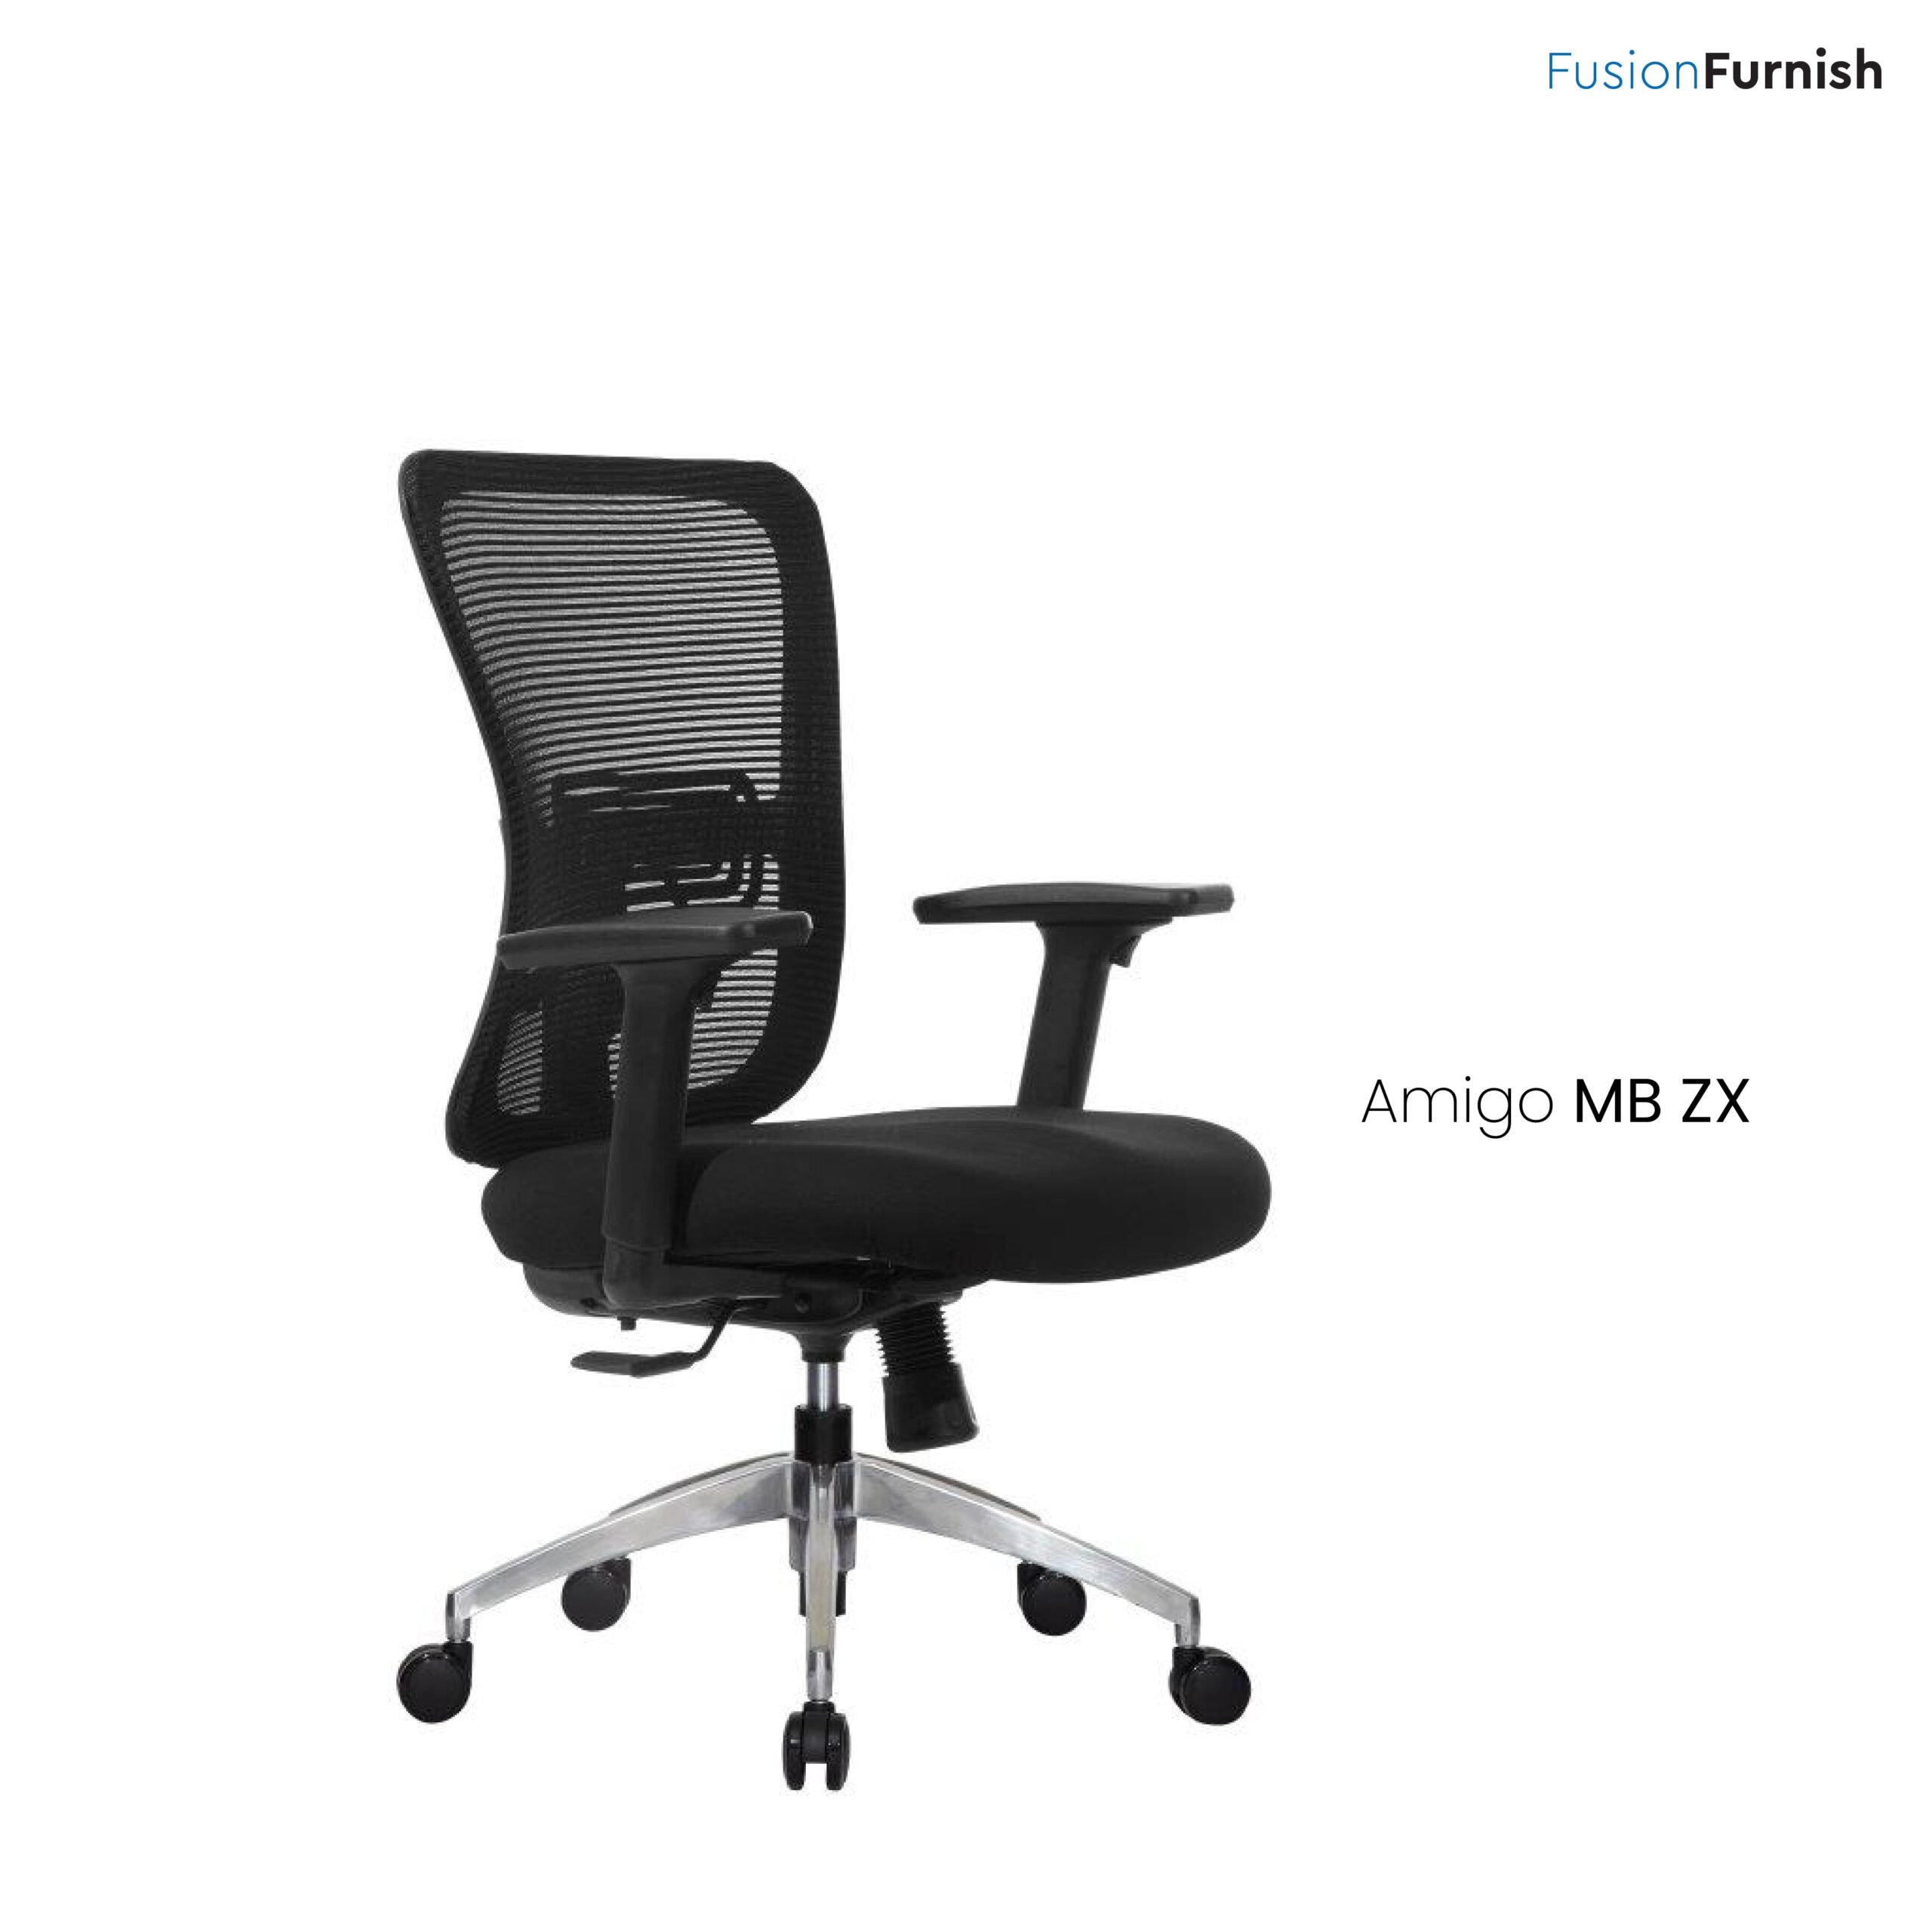 AMIGO MB LXStart your meetings on a welcoming note with the lean and clean form of the Amigo series office chair– it is a style you cannot refuse.